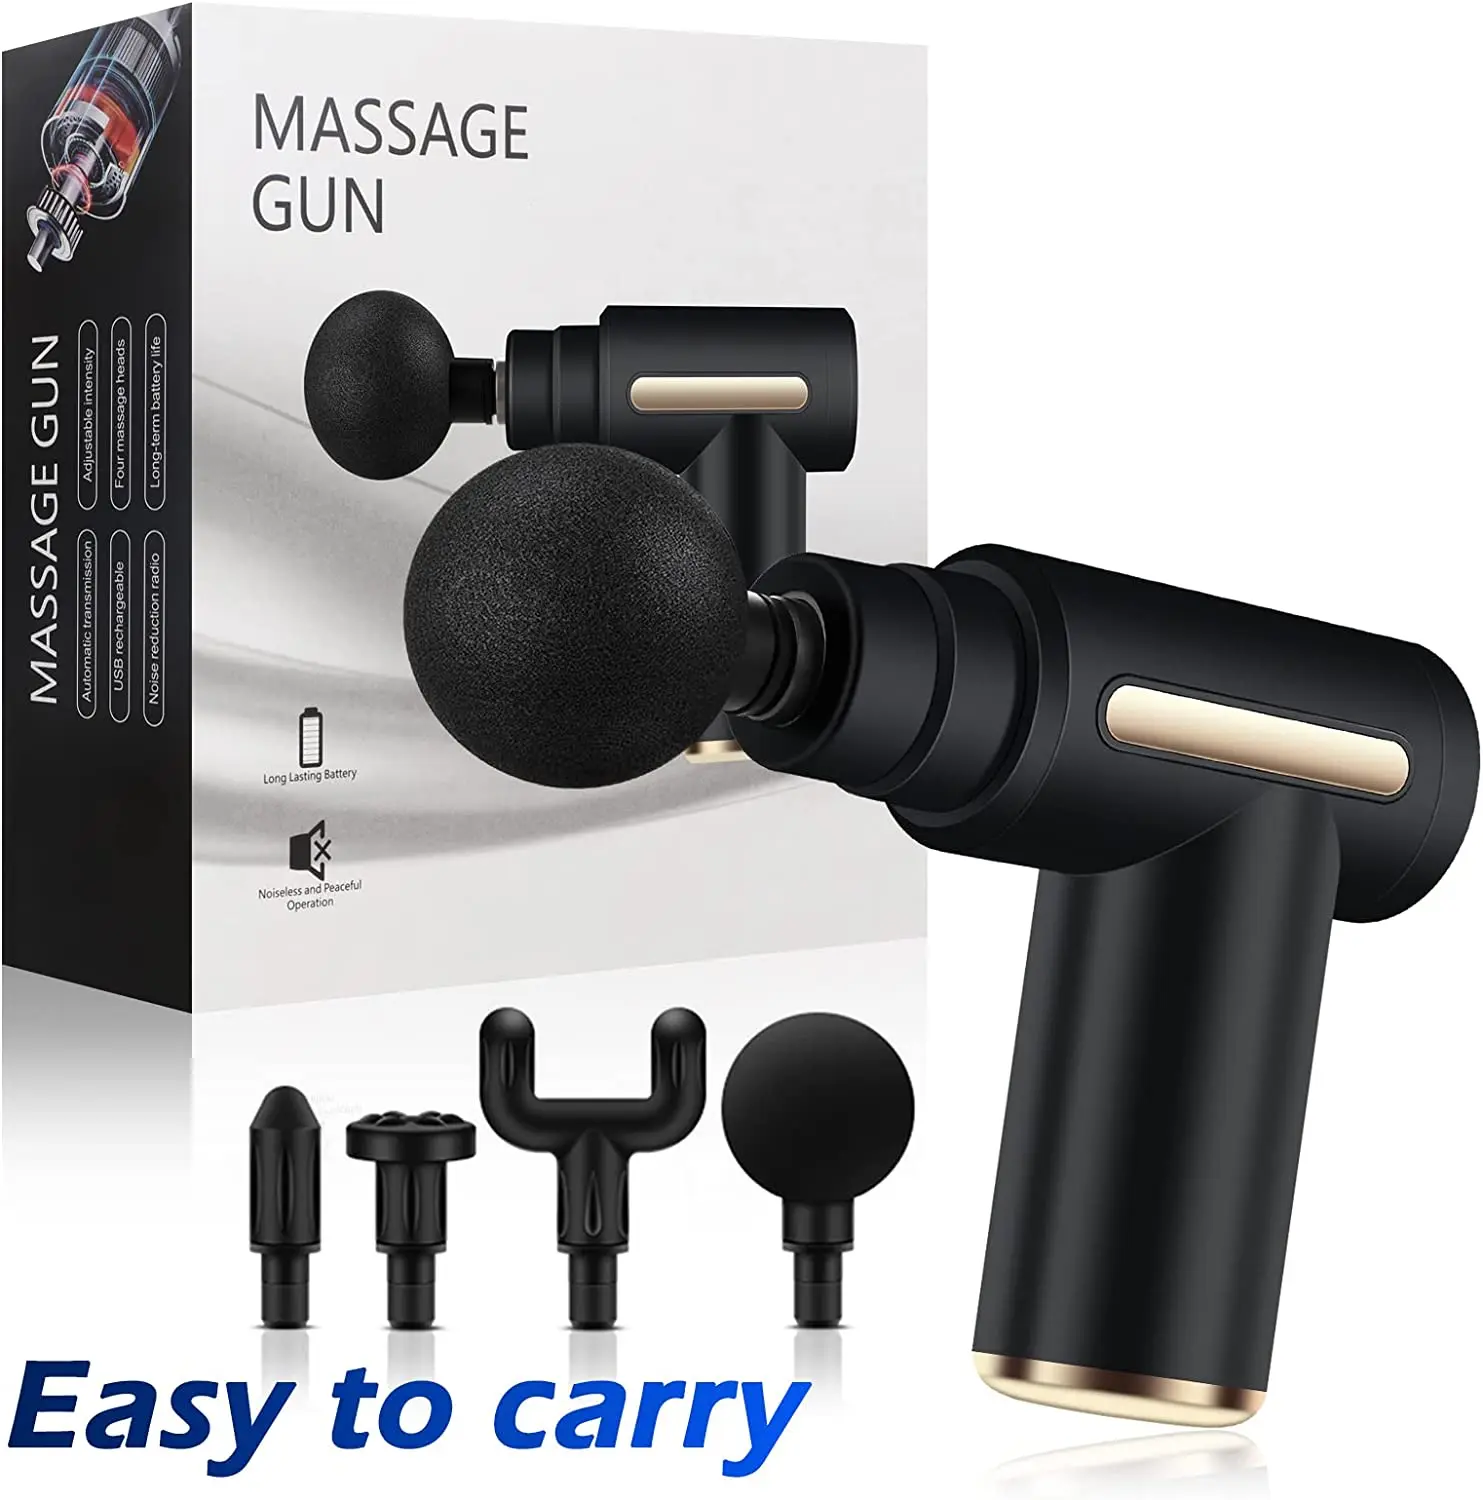 Portable Fascia Gun Vibration Massage Gun Percussion Pistol Massager For Deep Tissue Muscle Body Relaxation Mini Fitness Device new hot and cold fascia gun 3 frequency vibration handhold gym body relaxation deep muscle electric massage gun